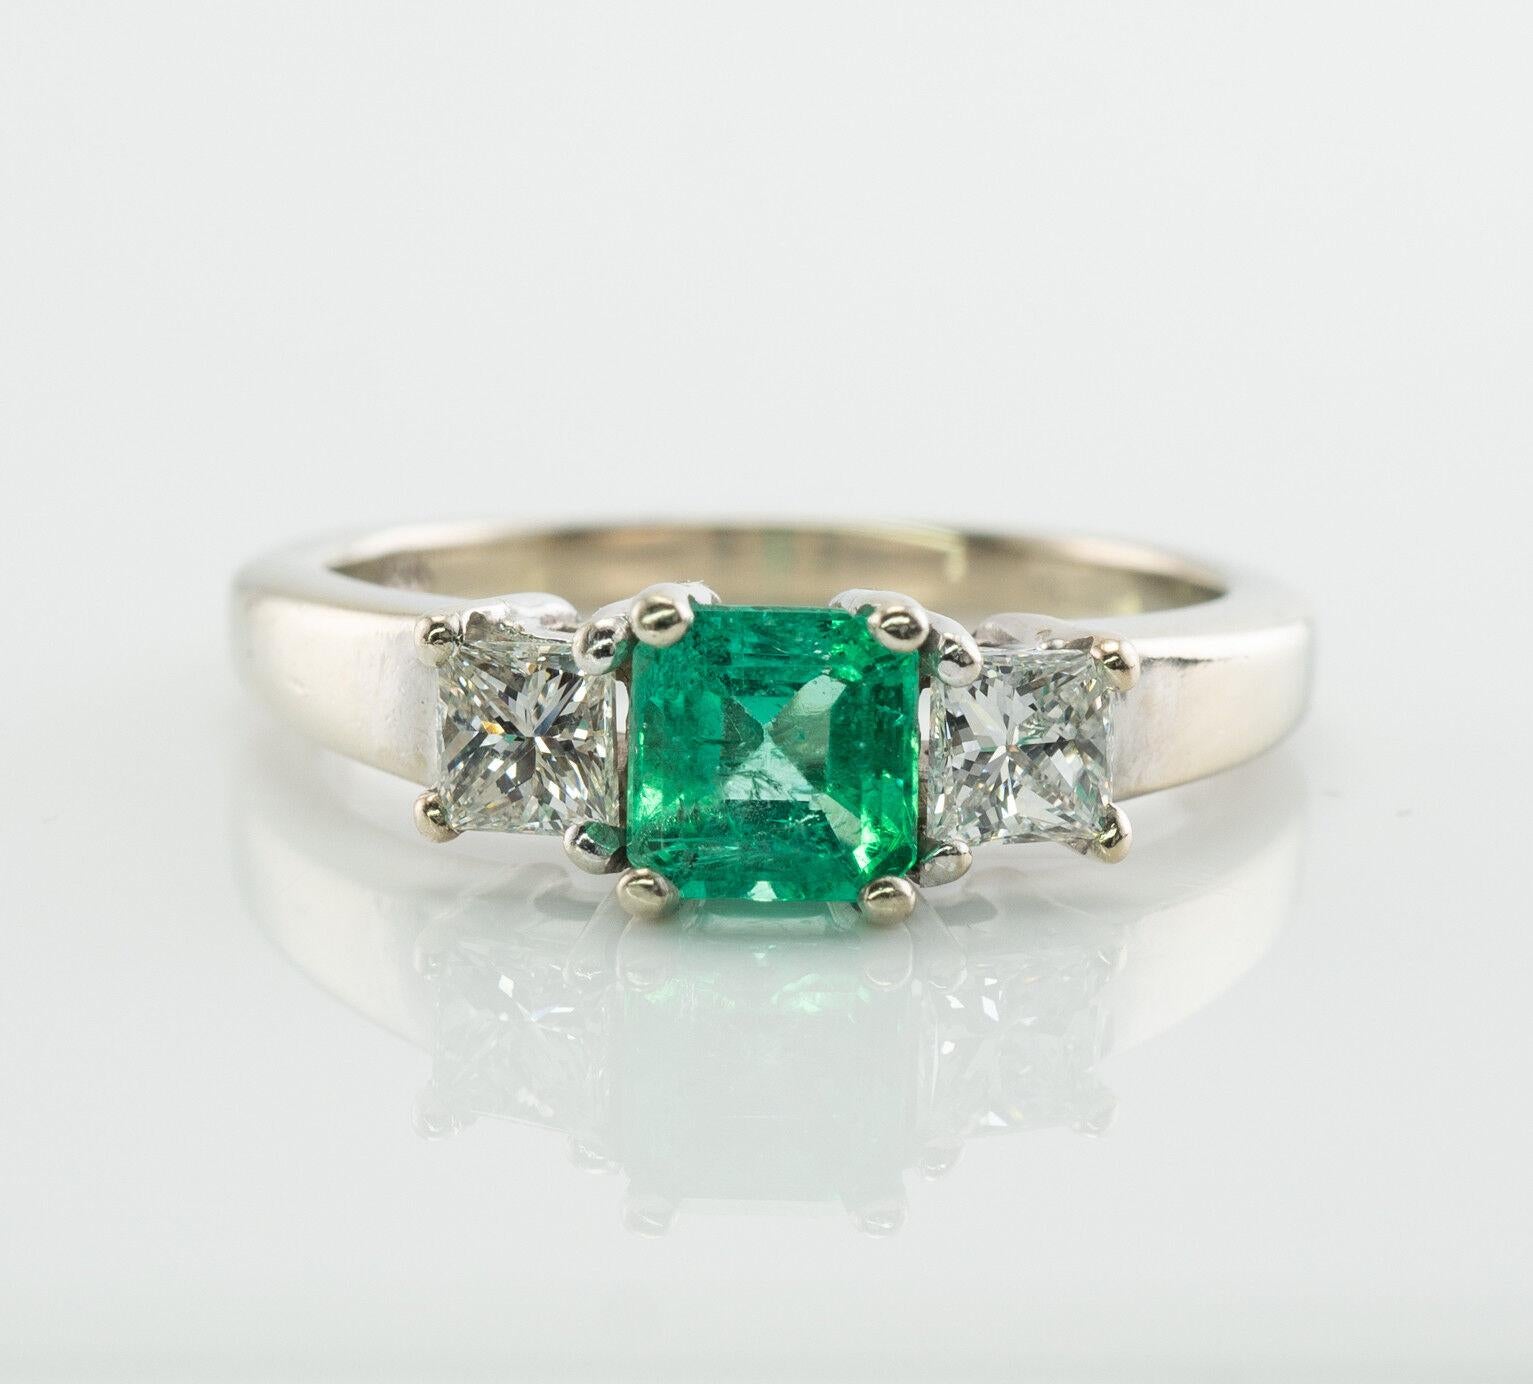 This gorgeous estate ring is finely crafted in solid 14K White Gold and set with genuine Earth mined High Quality Emerald and Diamonds.
The center square cut Colombian Emerald measures 6mm x 5mm (.73 carat) and this is a very clean and transparent